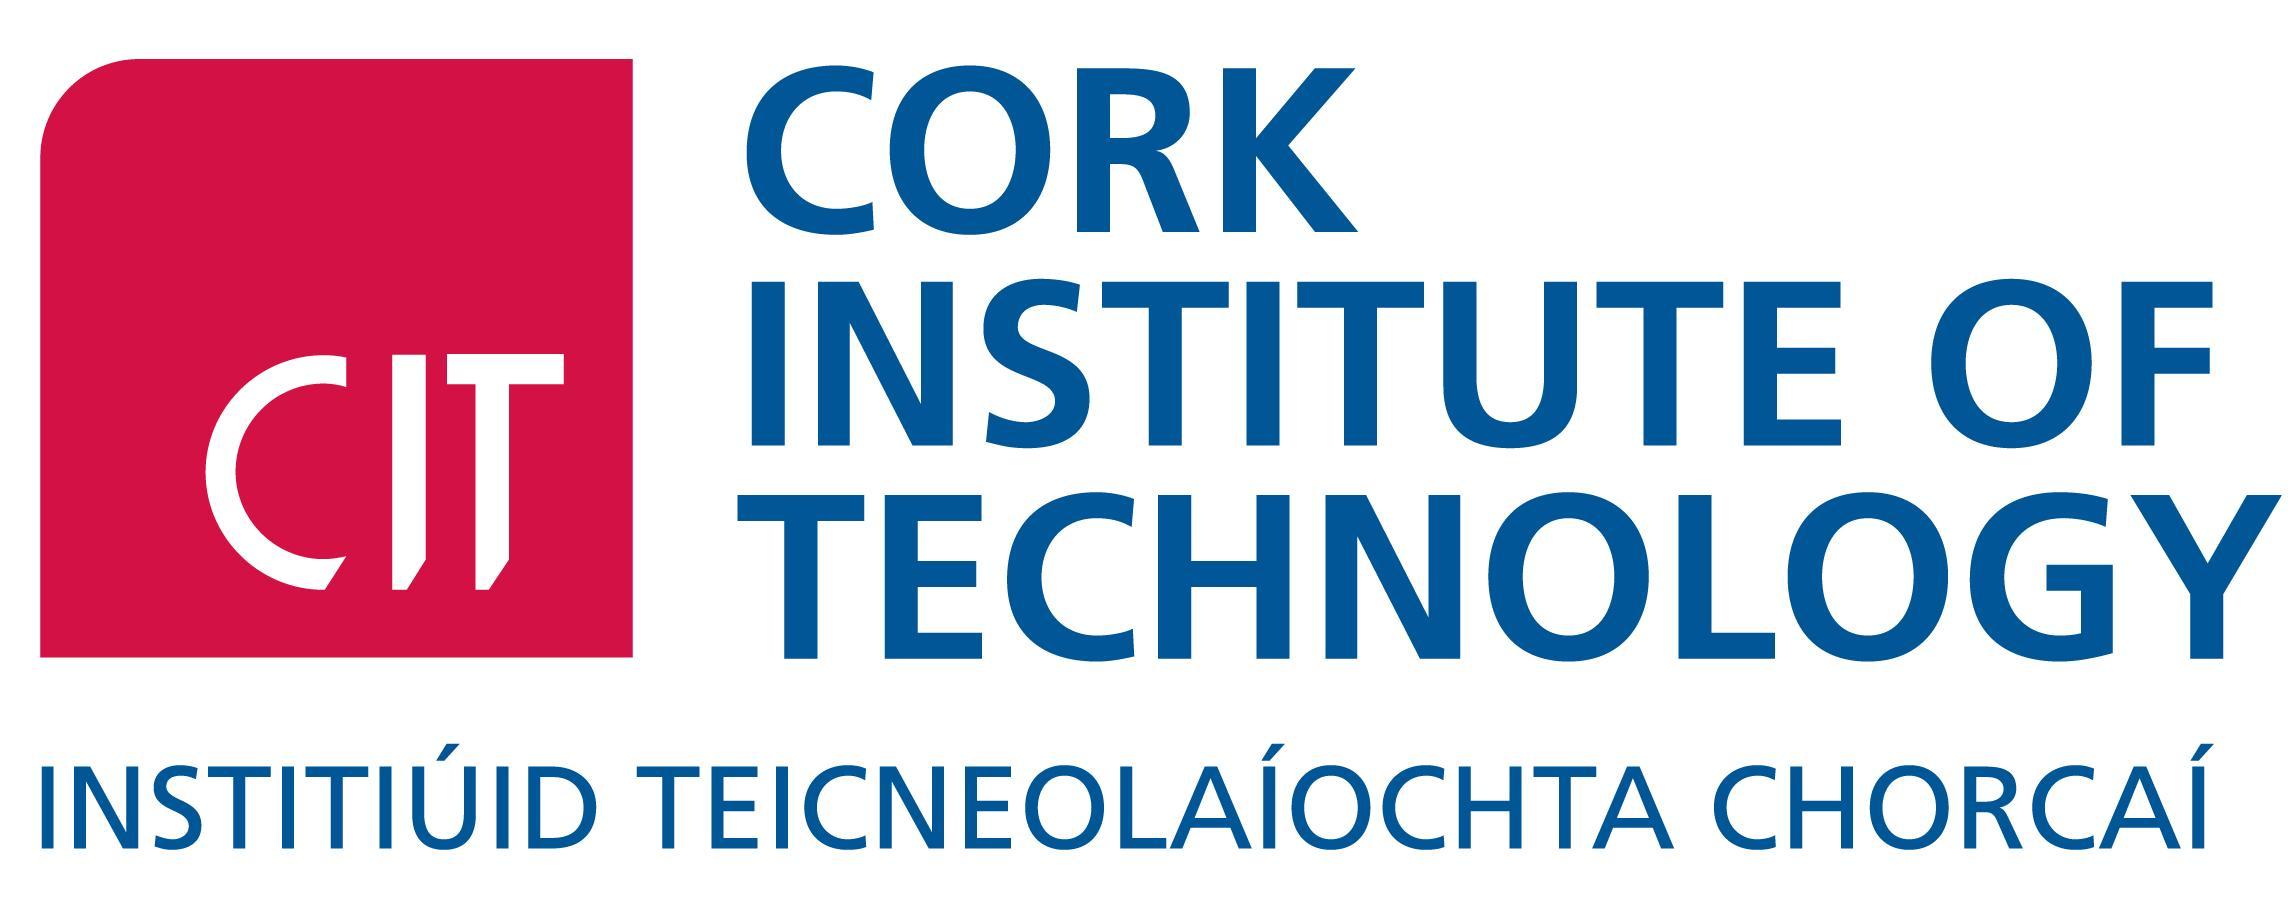 best overseas education consultant in India to study in Cork Institute of Technology